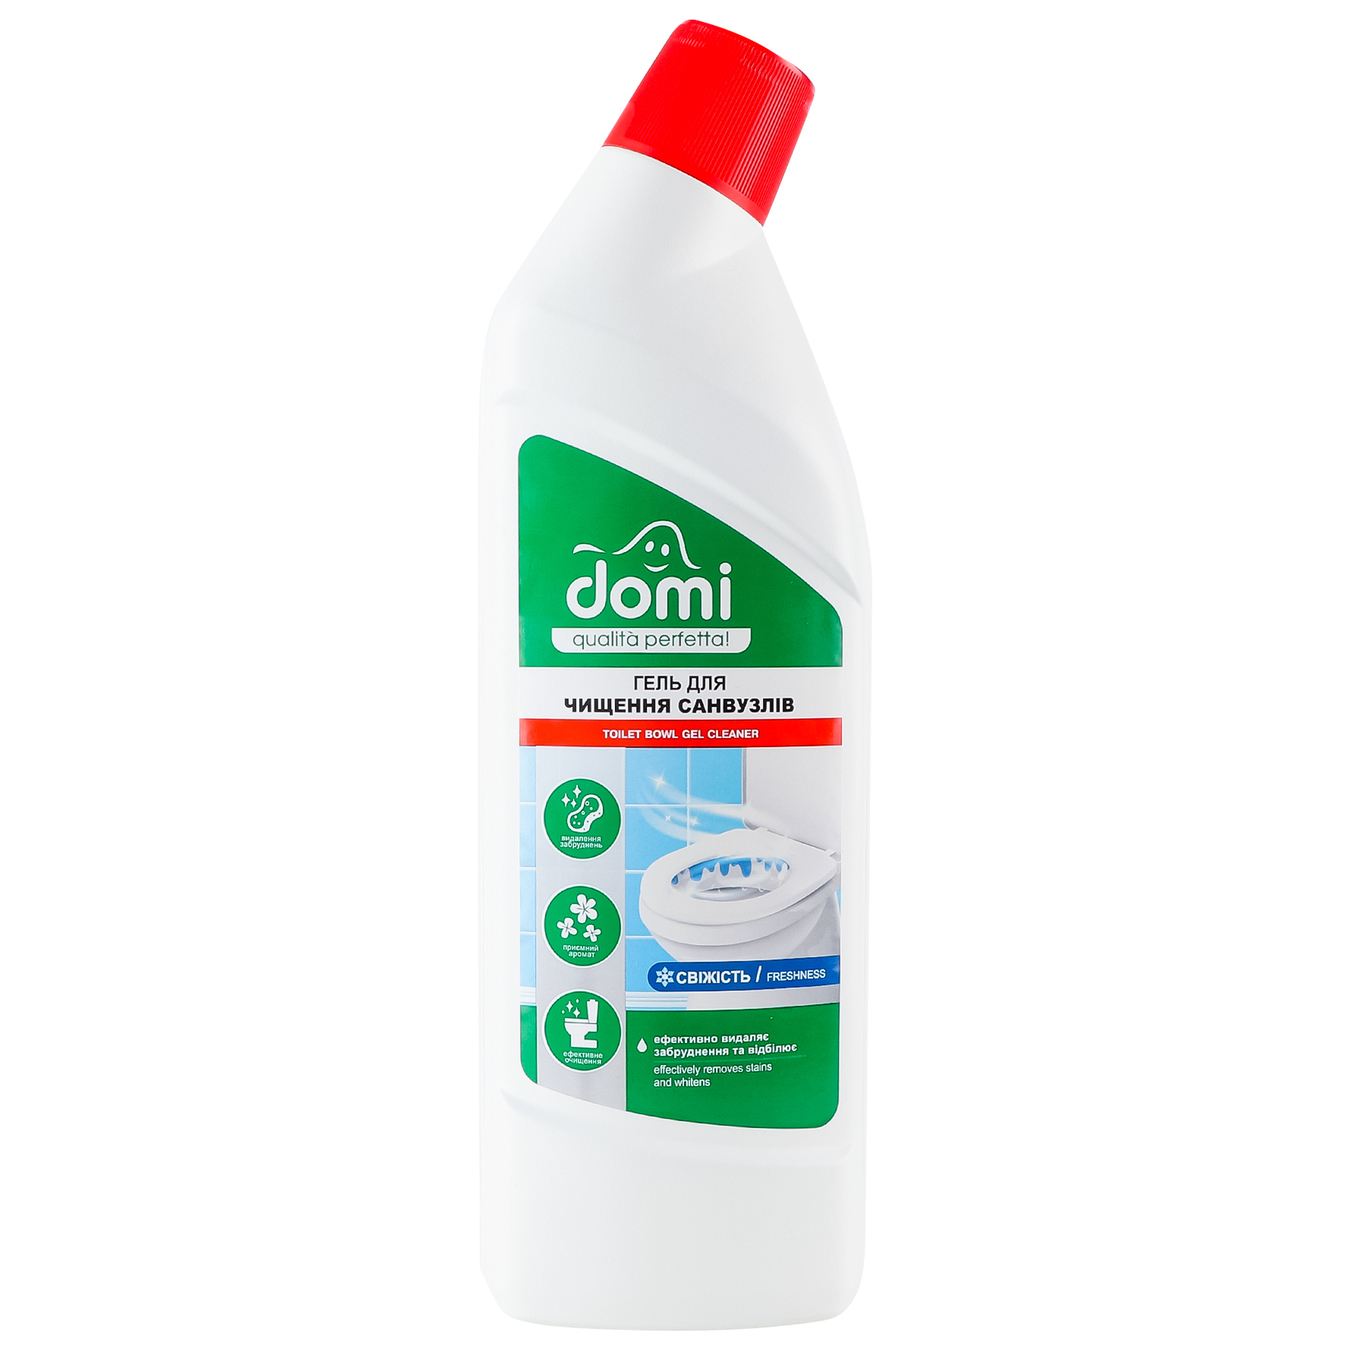 Gel Domi Freshness for cleaning bathrooms 1l